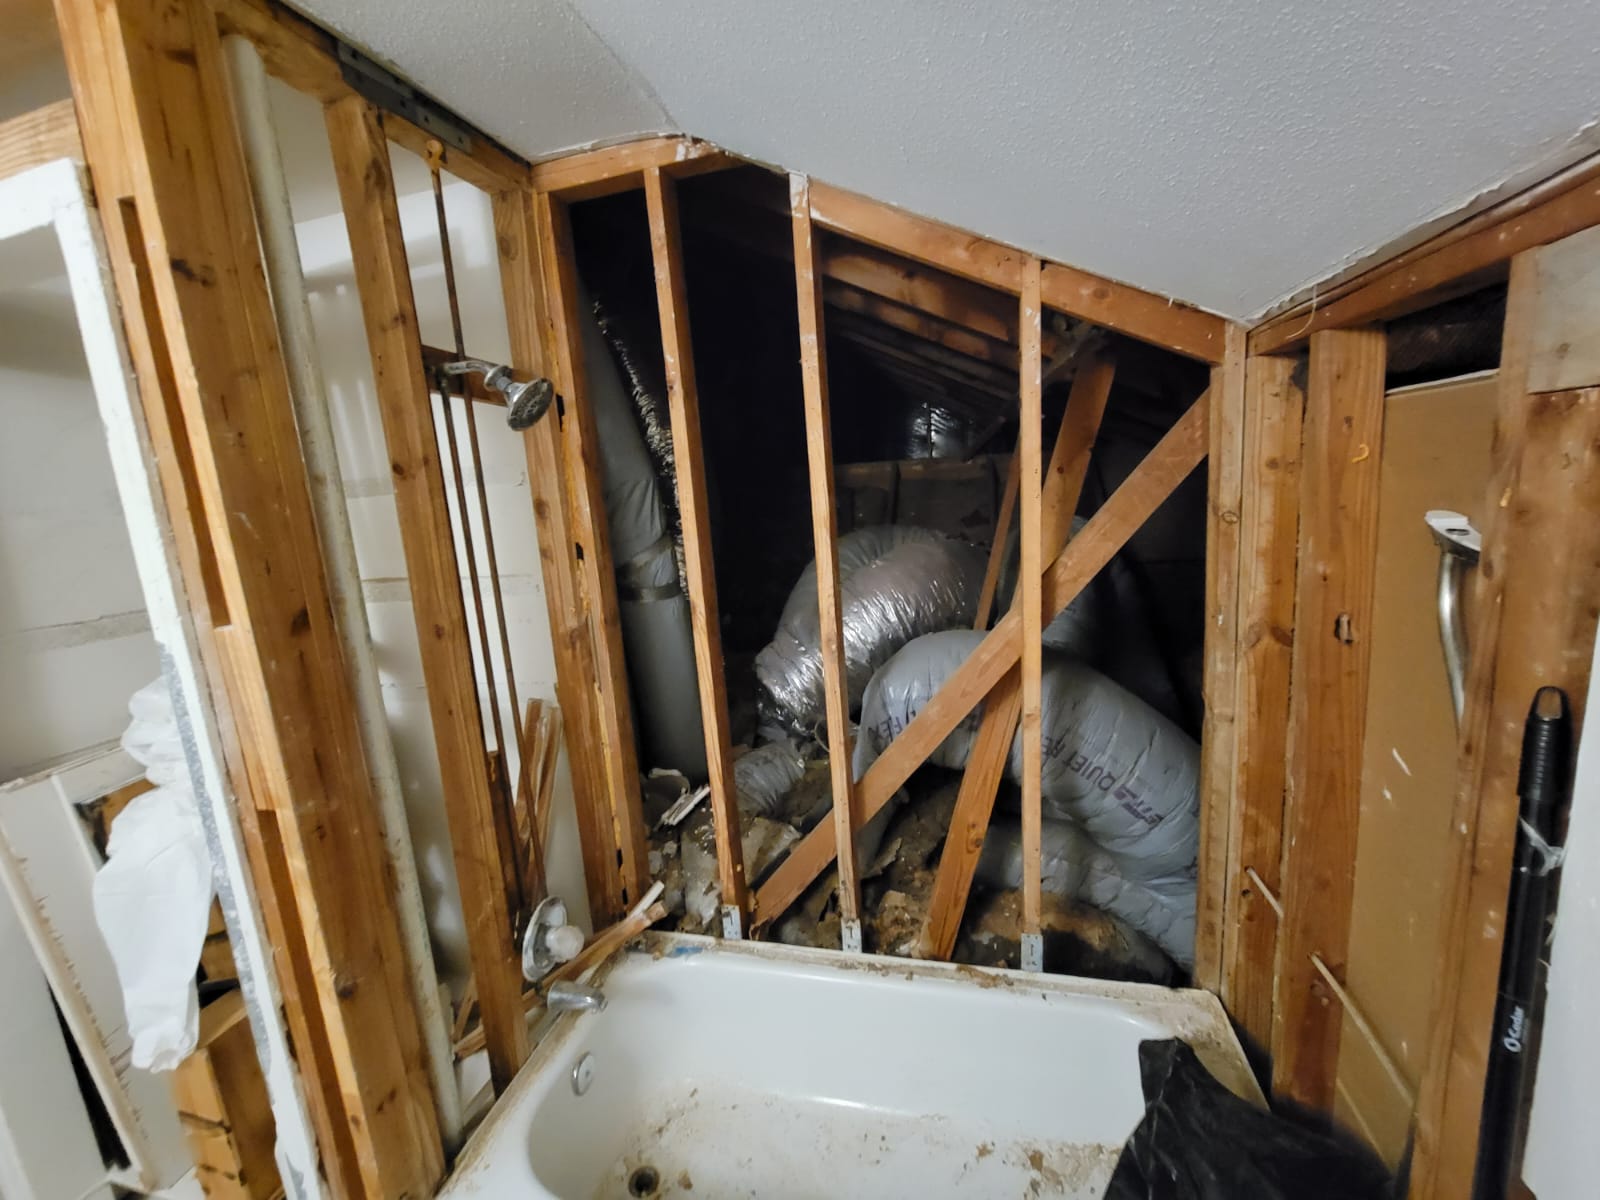 Mold Remediation after Deteriorated Wax Ring Caused Mold in Houston, TX